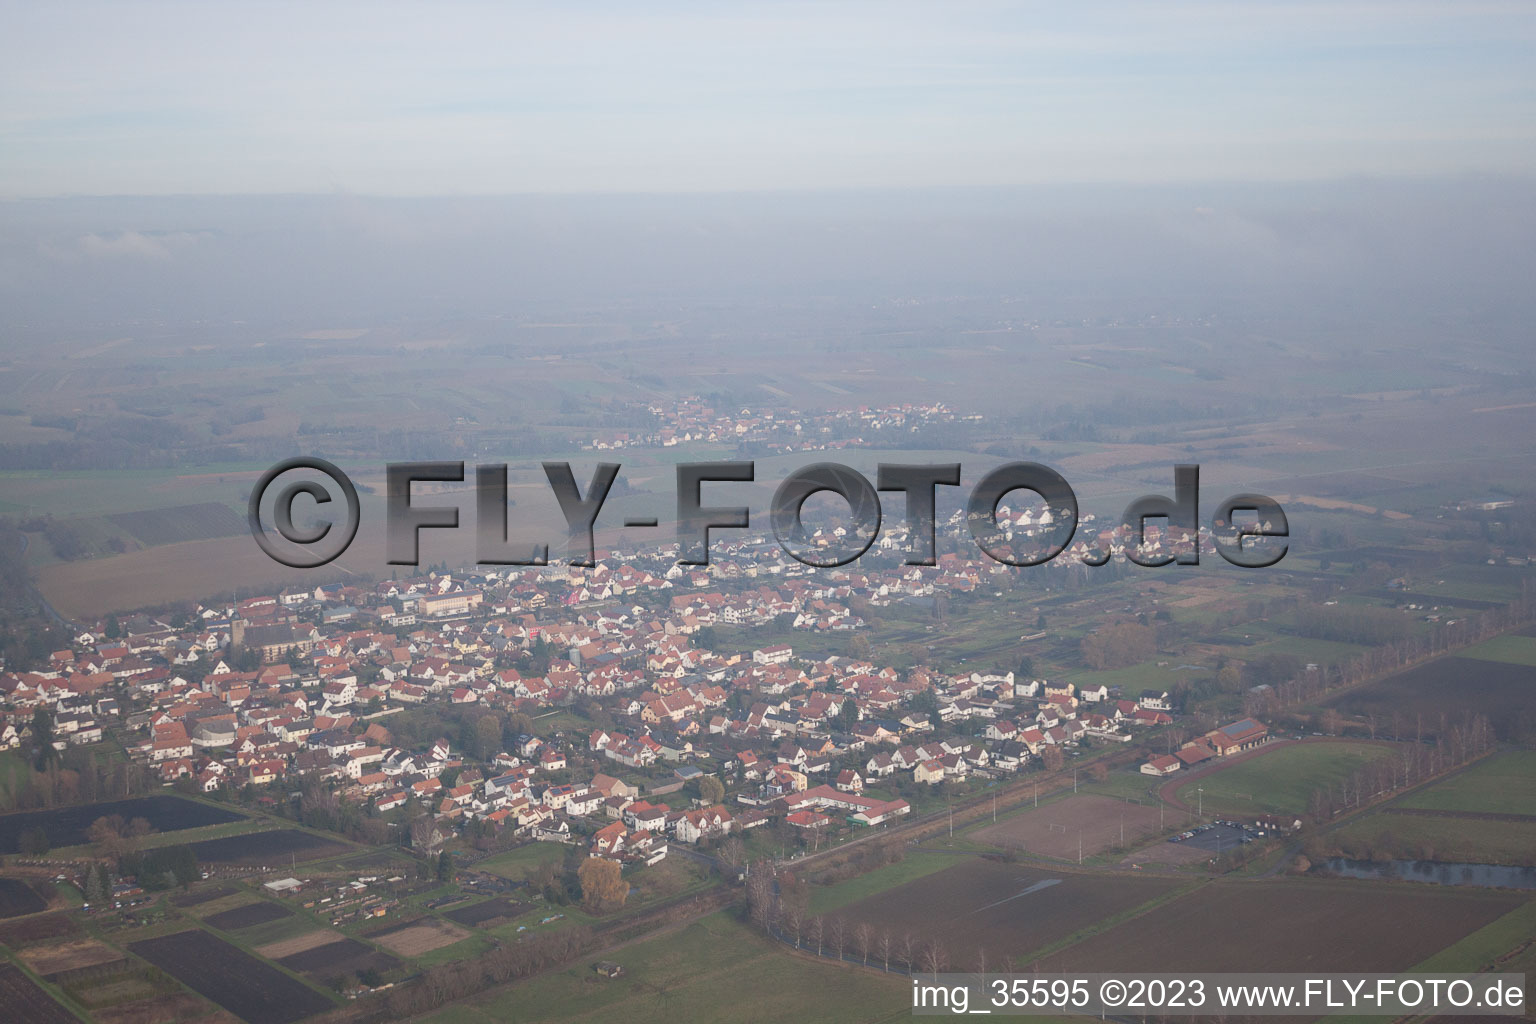 Kapsweyer in the state Rhineland-Palatinate, Germany seen from above